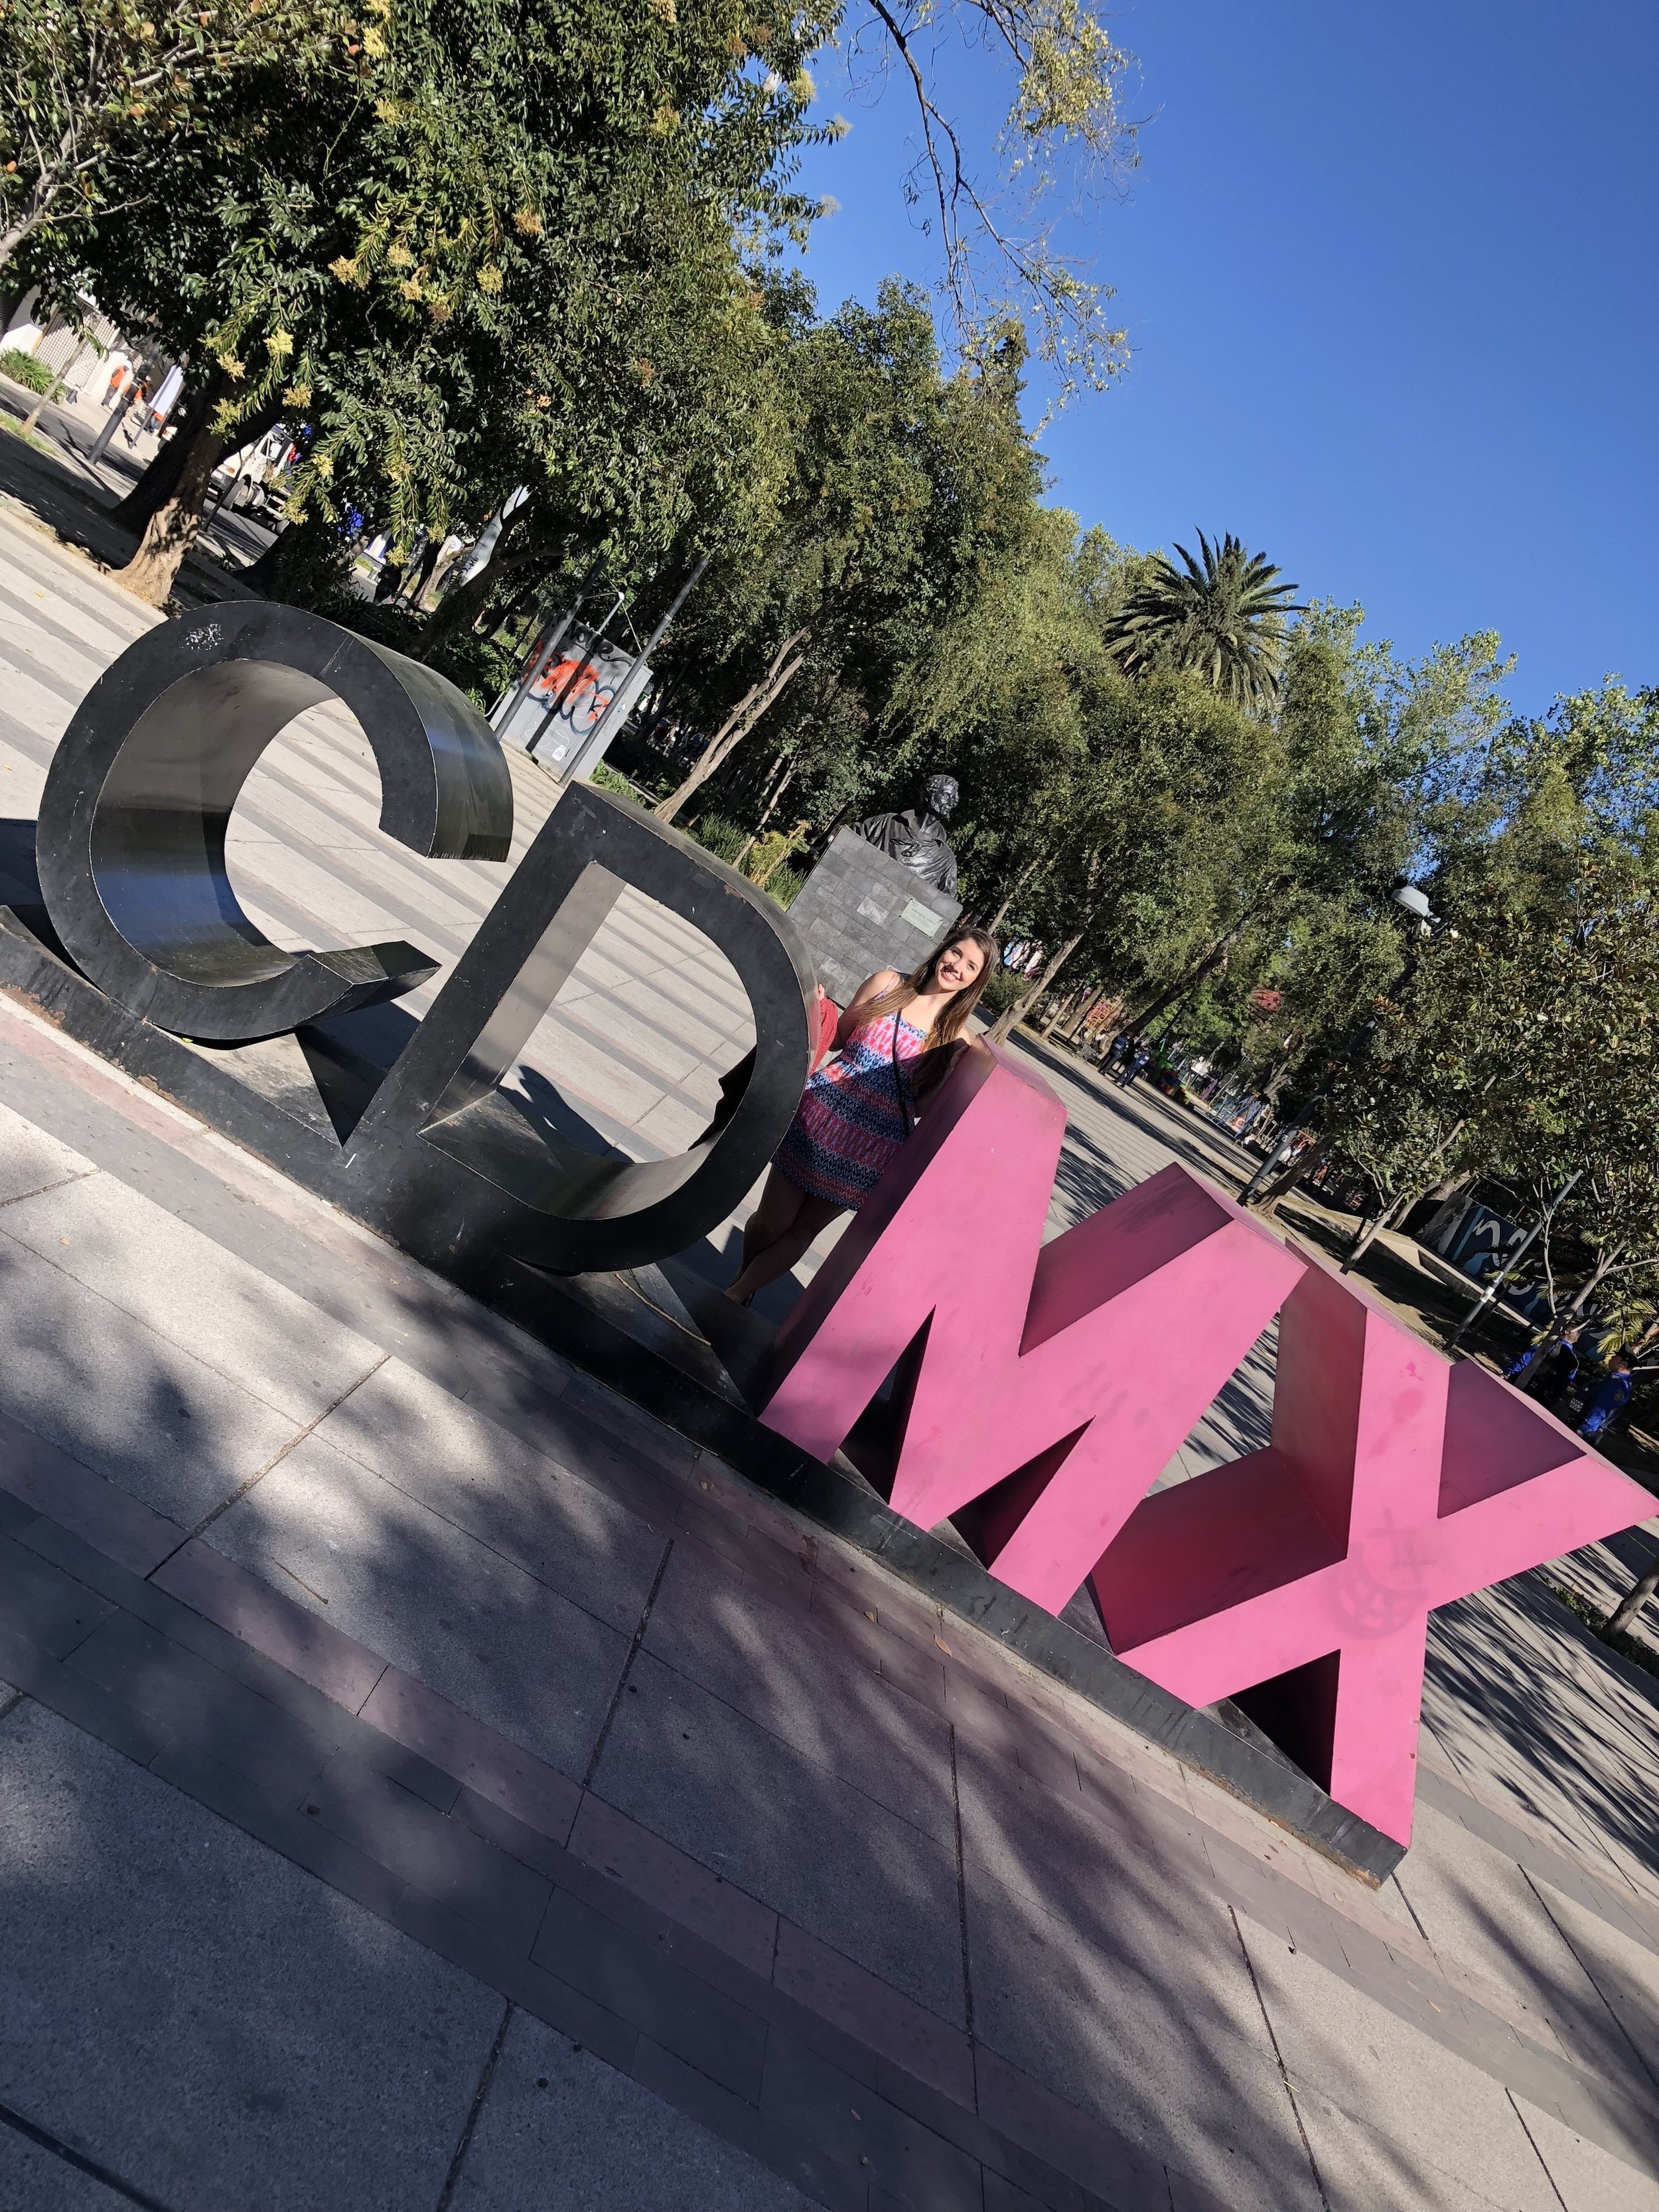 Mexico City | CDMX City Sign | The 10 Best Spots to Eat and Drink in Mexico City | www.flowersandleatherevents.com